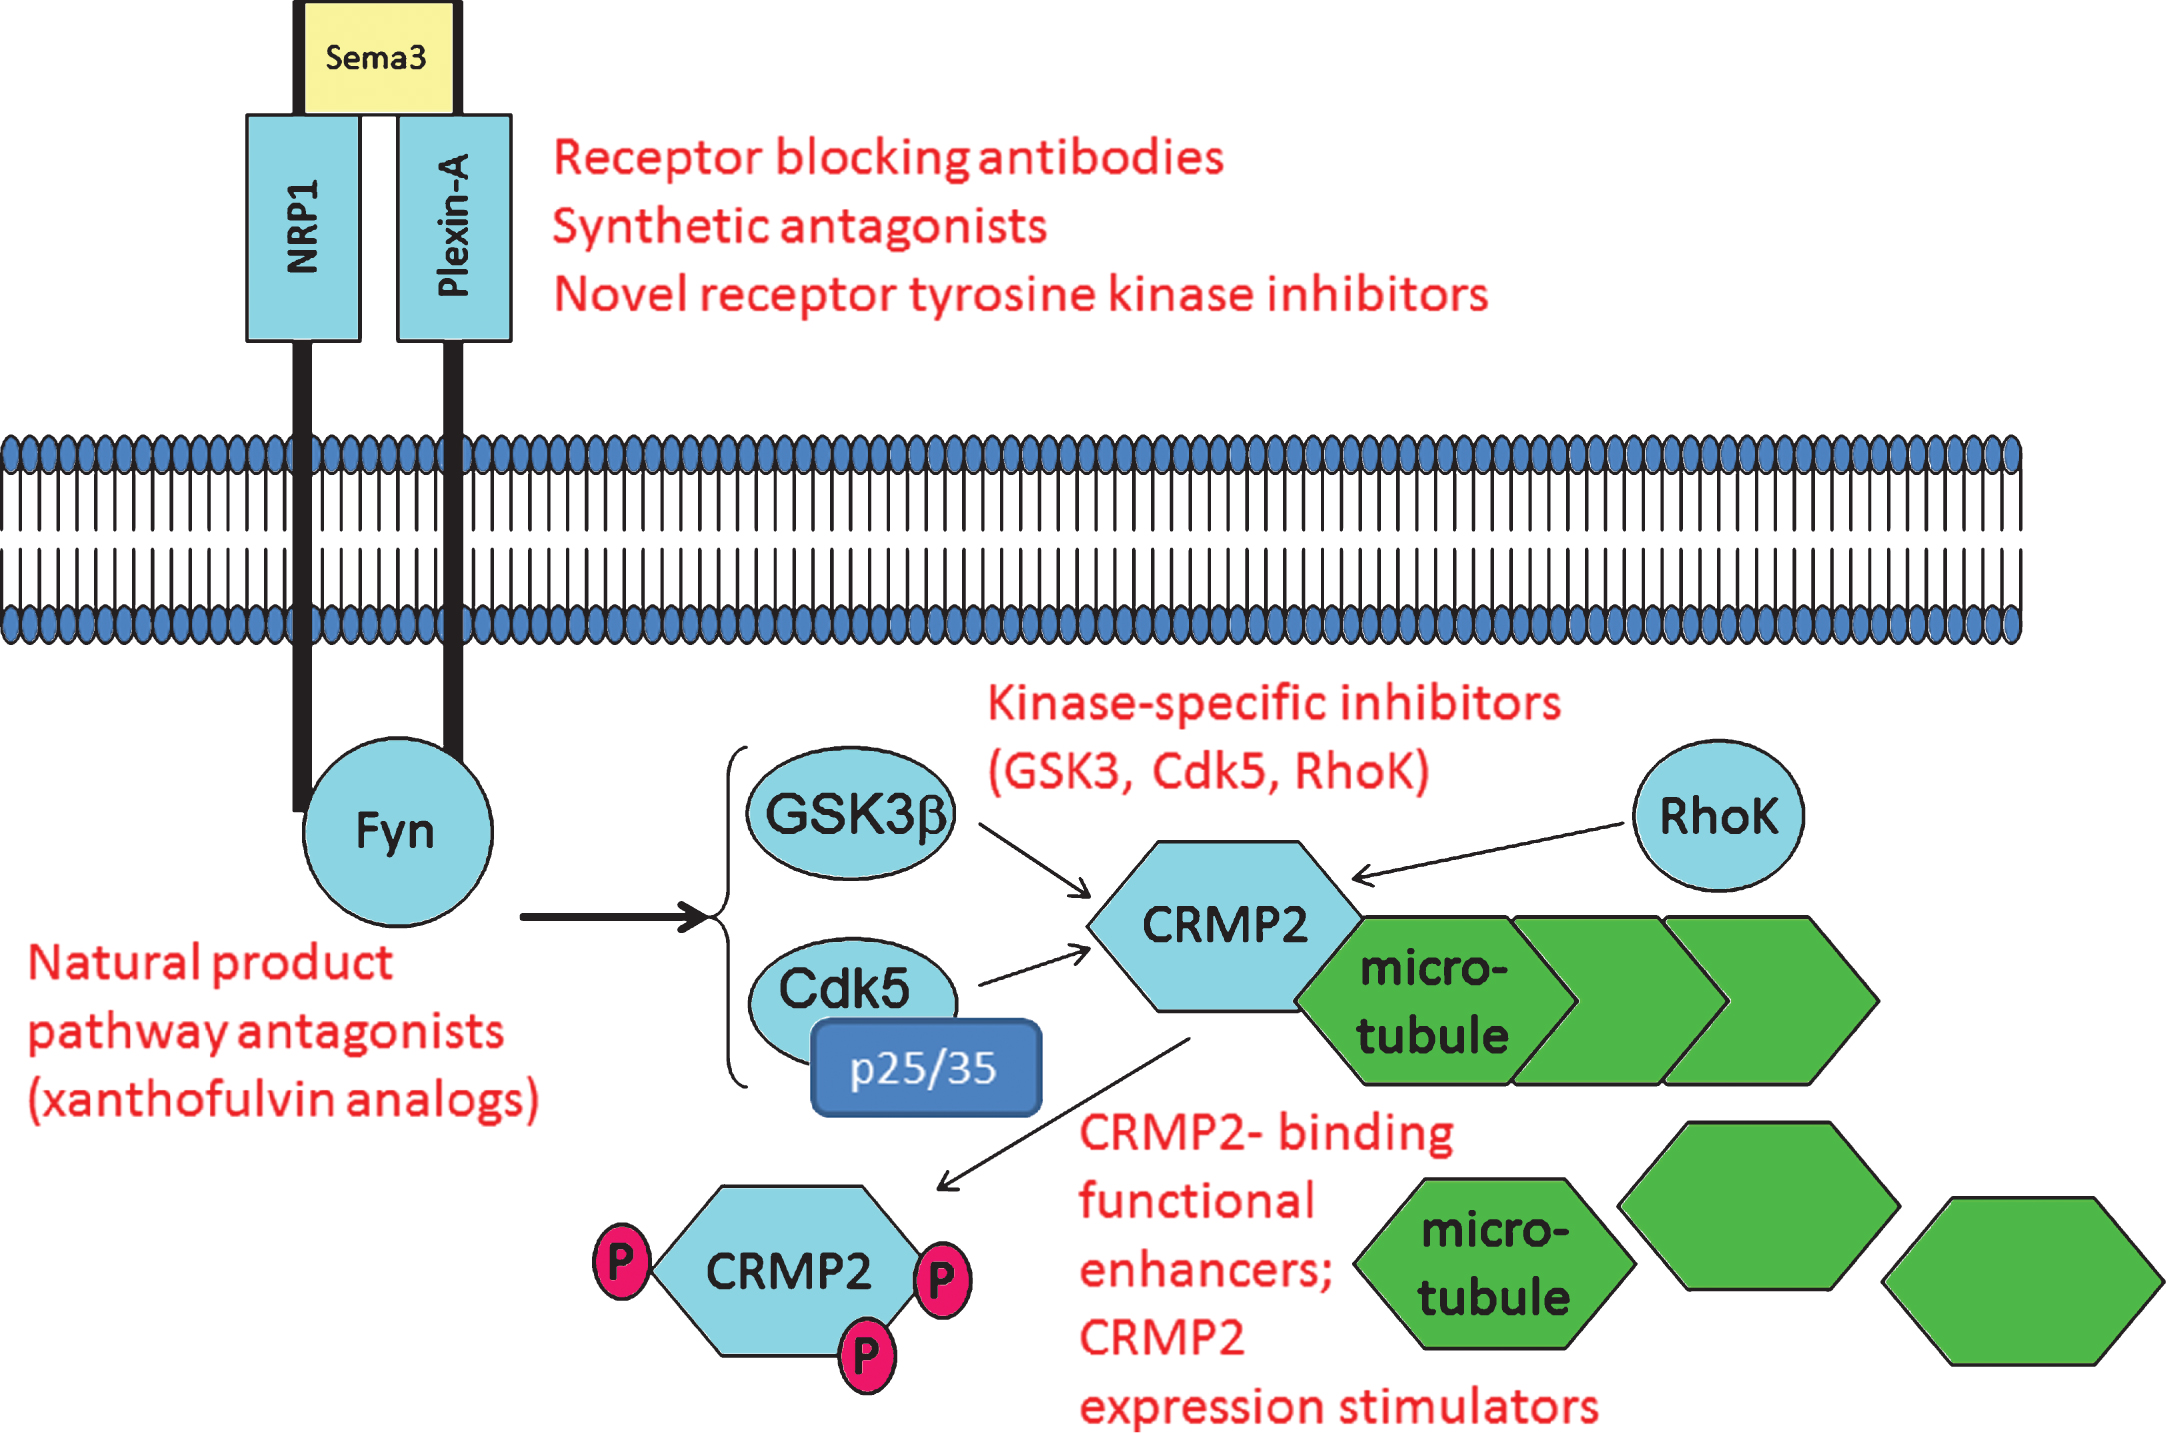 CRMP2 and CRMP2-directed pathways are potential targets for pharmacotherapy. As described in the text, examples exist wherein CRMP2 signaling through axon repulsion-factor receptors can be blocked using anti-NRP1 antibodies and the fungal metabolite xanthofulvin. Other small molecules such as tianeptine significantly increase CRMP2 protein expression, apparently by sensitizing growth factor-dependent gene expression. Small molecules including lanthionine ketimine derivatives and lacosamide bind CRMP2 to functionally enhance or inhibit CRMP2 neurotrophic actions, respectively. Calpain-specific inhibitors could decrease p25 and hence, Cdk5/p25 activity upon CRMP2. One or more of these pathway components might offer value for study in development of AD-directed therapeutics whose action need not rely upon any explicit assumptions about Aβ or tau. Examples of potential therapy target sites are indicated in red font.